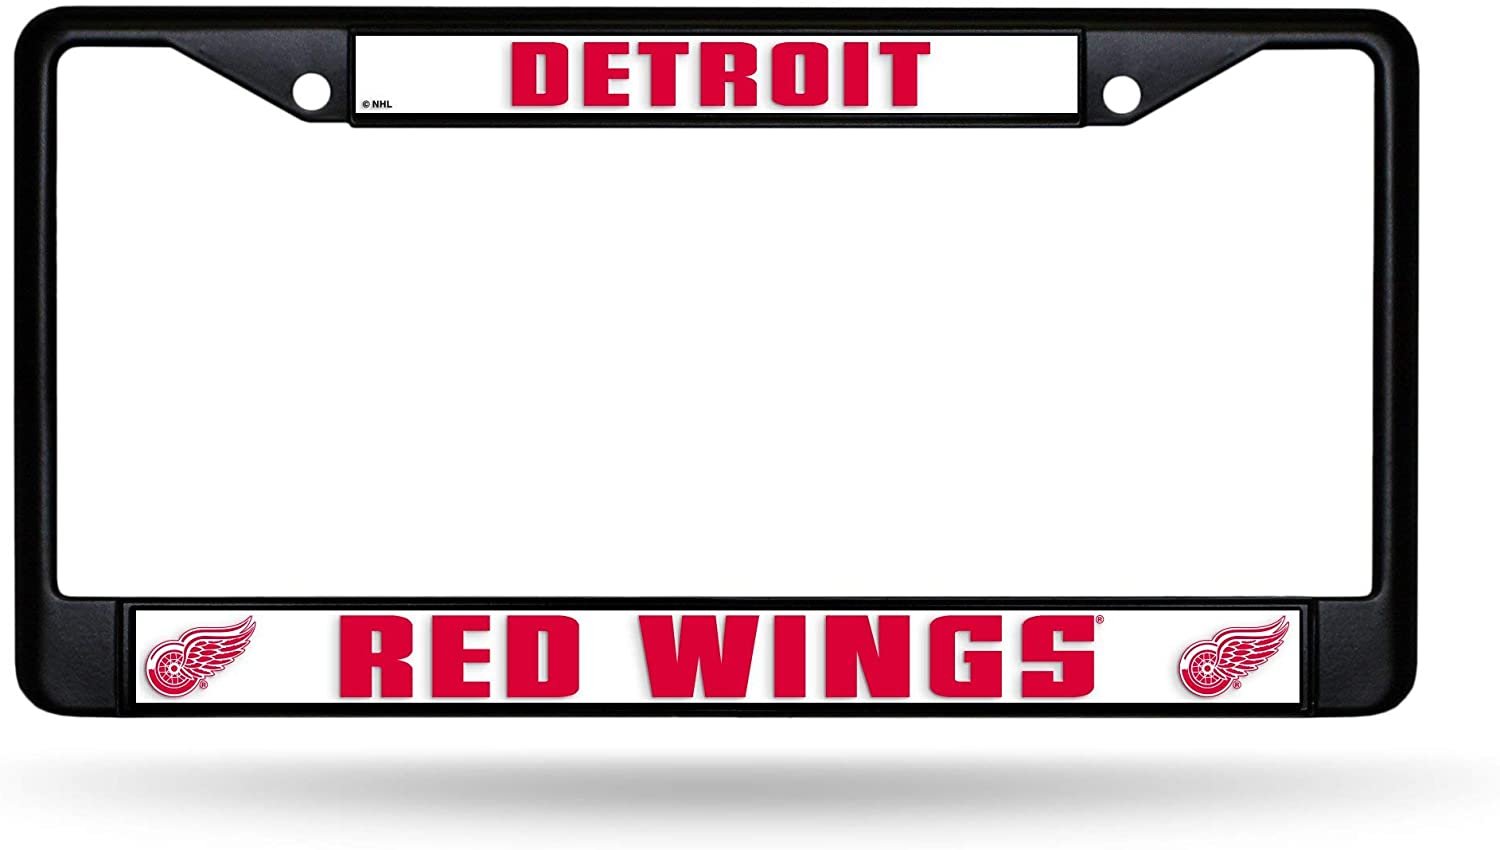 Detroit Red Wings Black Metal License Plate Frame Chrome Tag Cover 6x12 Inch